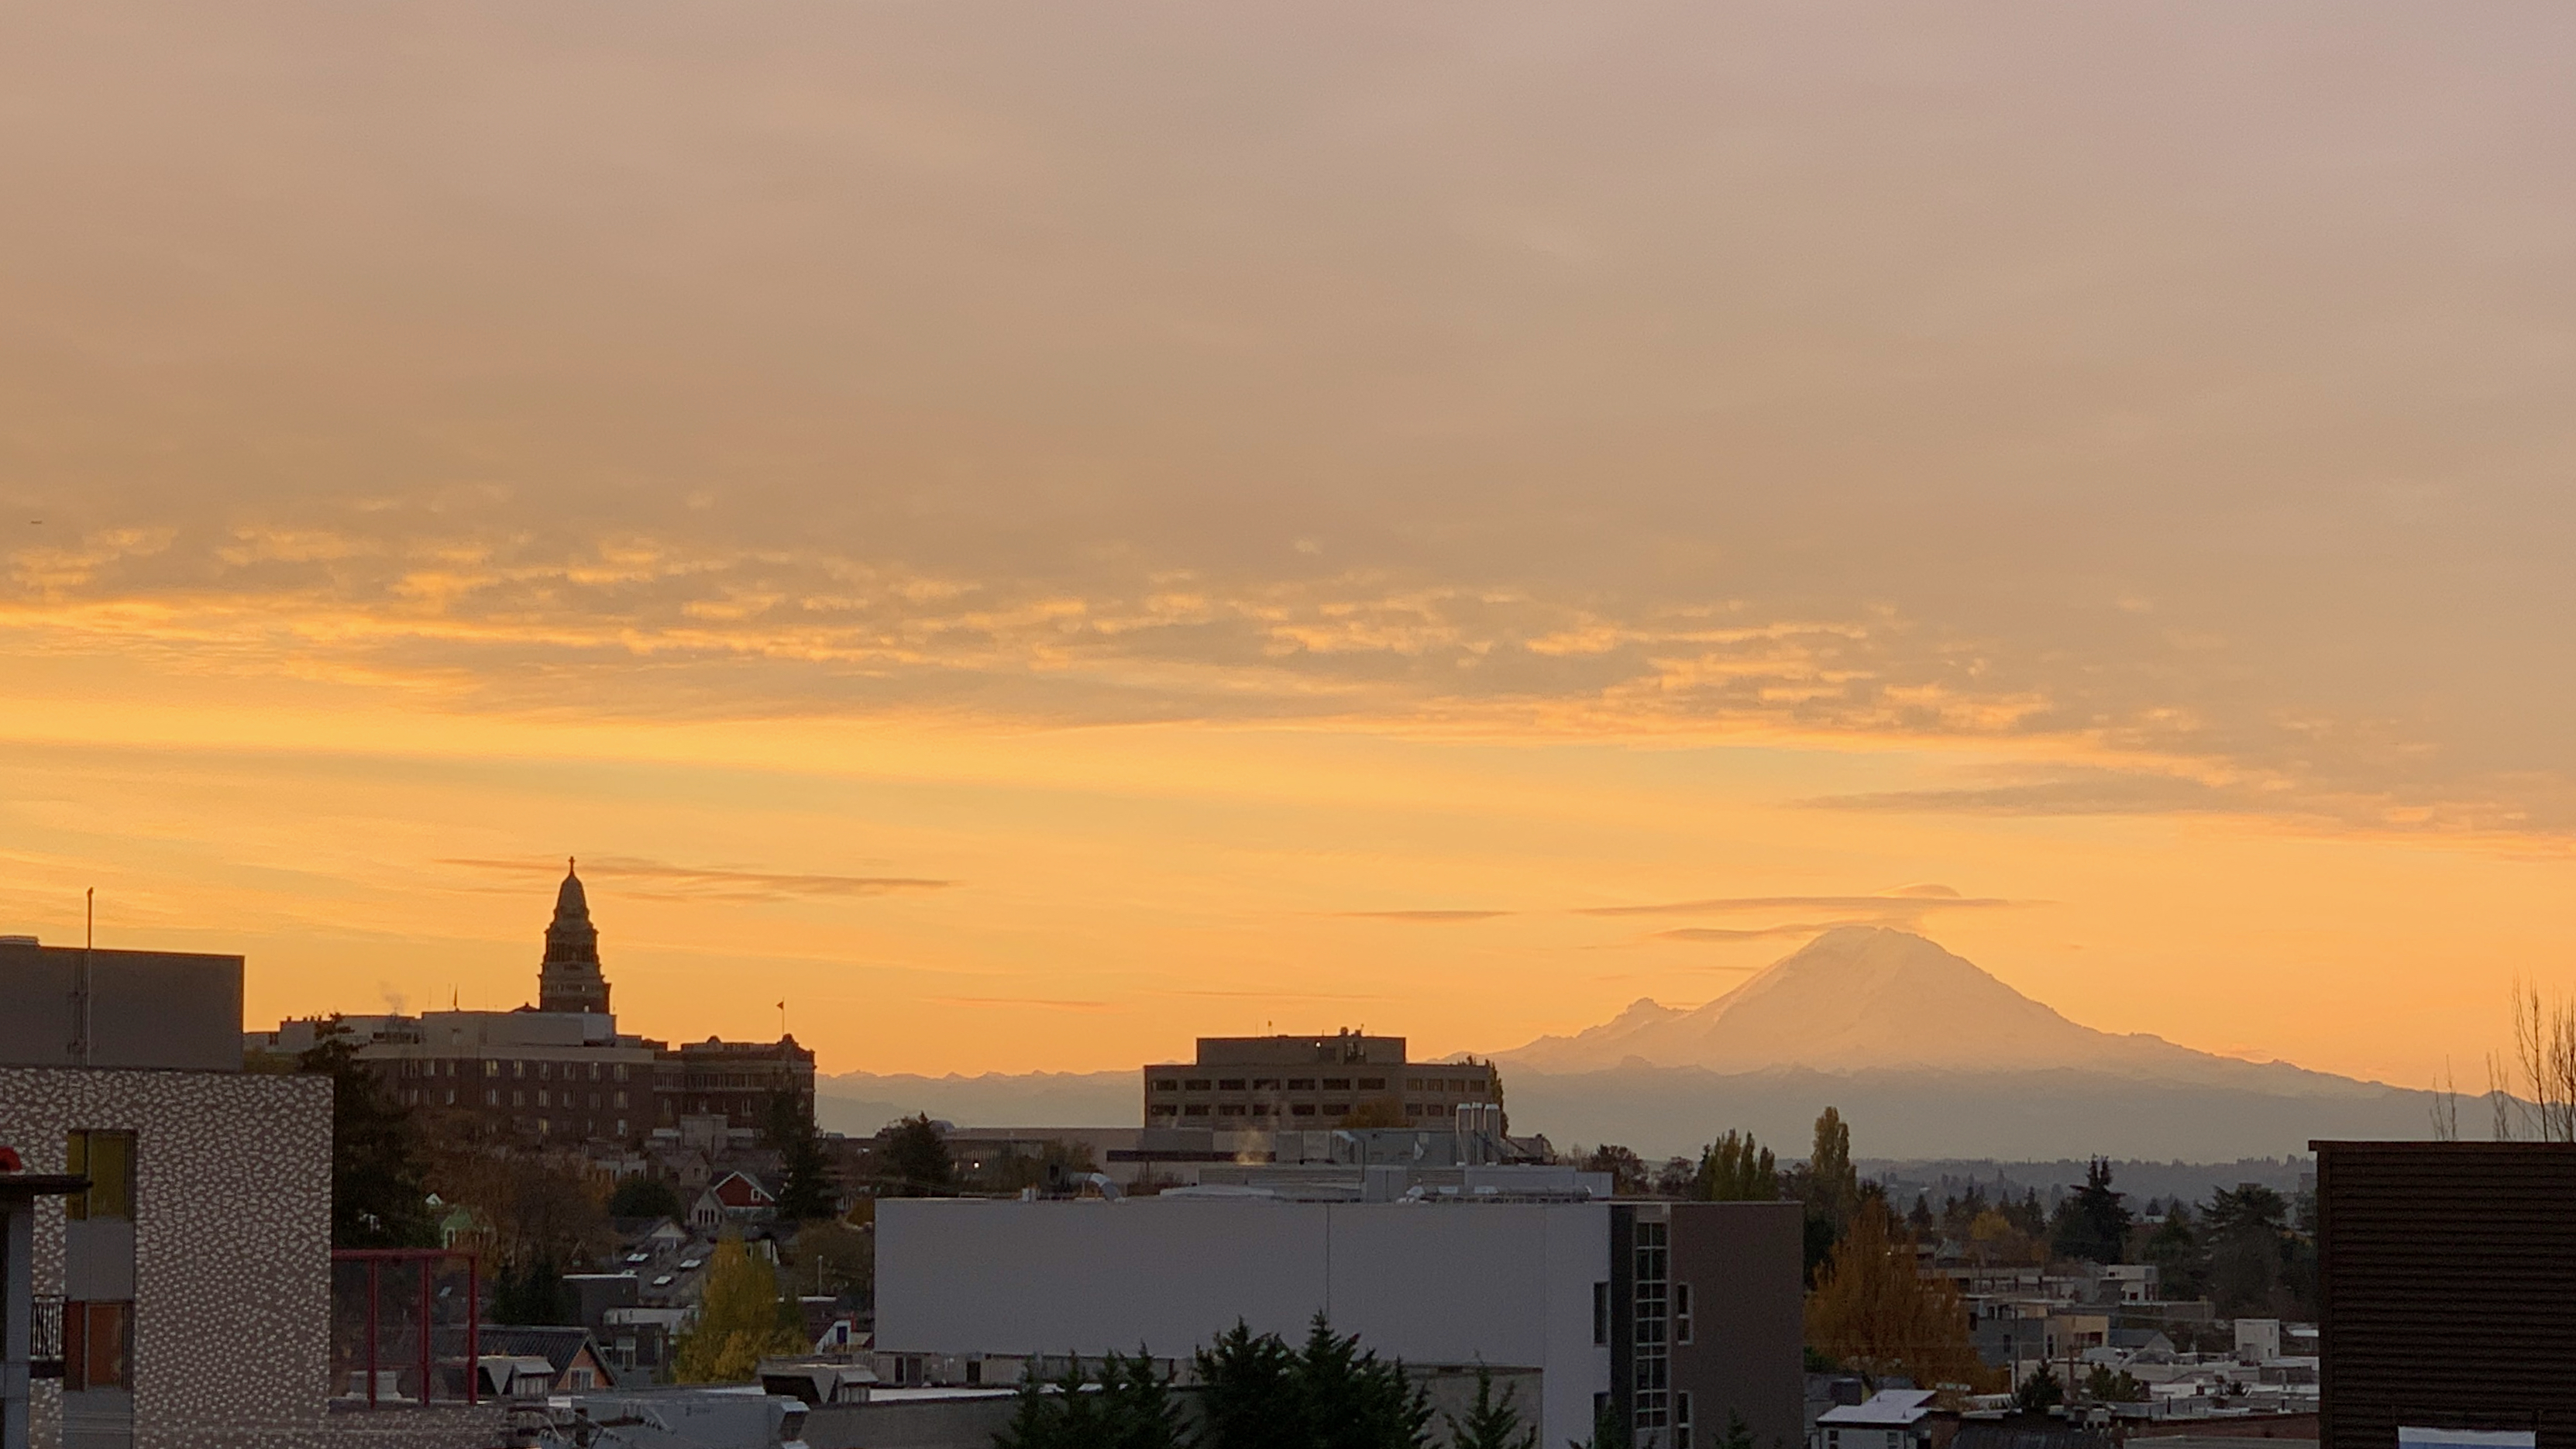 sunrise in Seattle, looking out to Mount Rainier in the distance